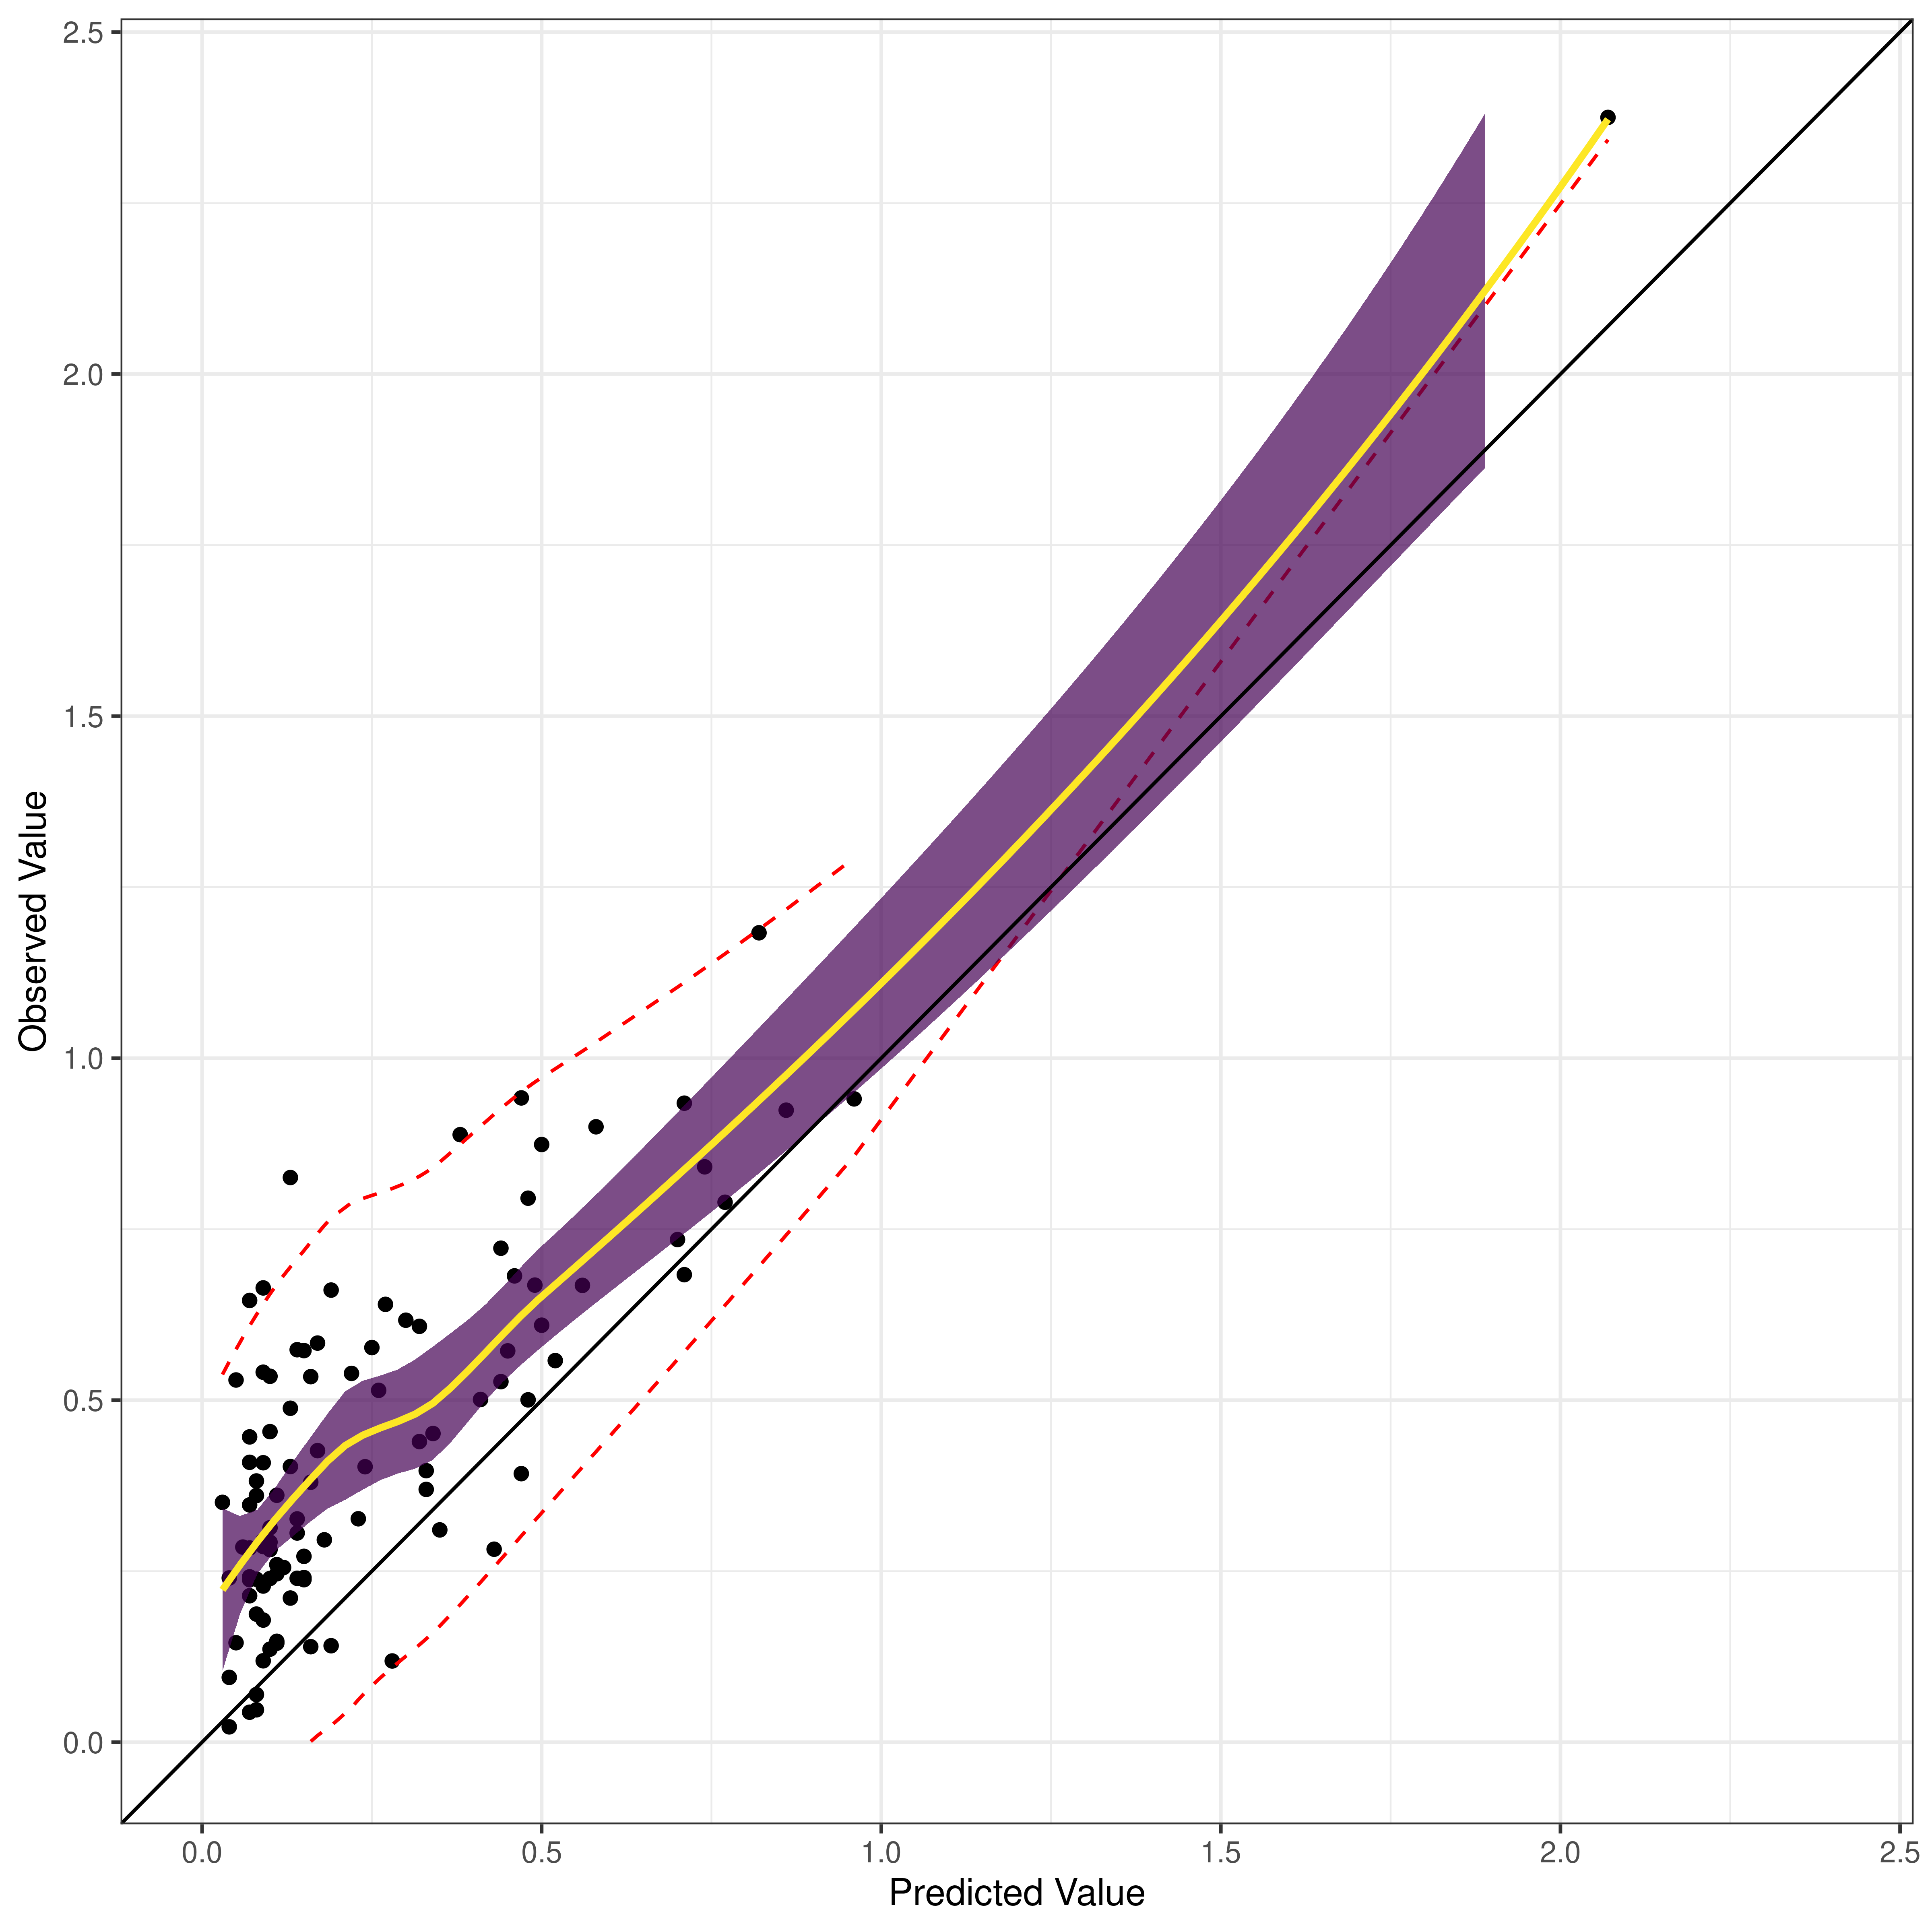 Calibration Plot for Predictions of a Continuous Outcome, With LOESS Best-Fit Line. The yellow line is the best-fit line based on LOESS. The purple band is the 95% confidence interval of the observed value. The dashed red lines are the 95% prediction interval of the observed value. The 95% confidence interval of the observed value does not include the reference line (i.e., the actual observed value) at lower levels of the predicted values, so the predictions are miscalibrated at lower levels of the predicted values.